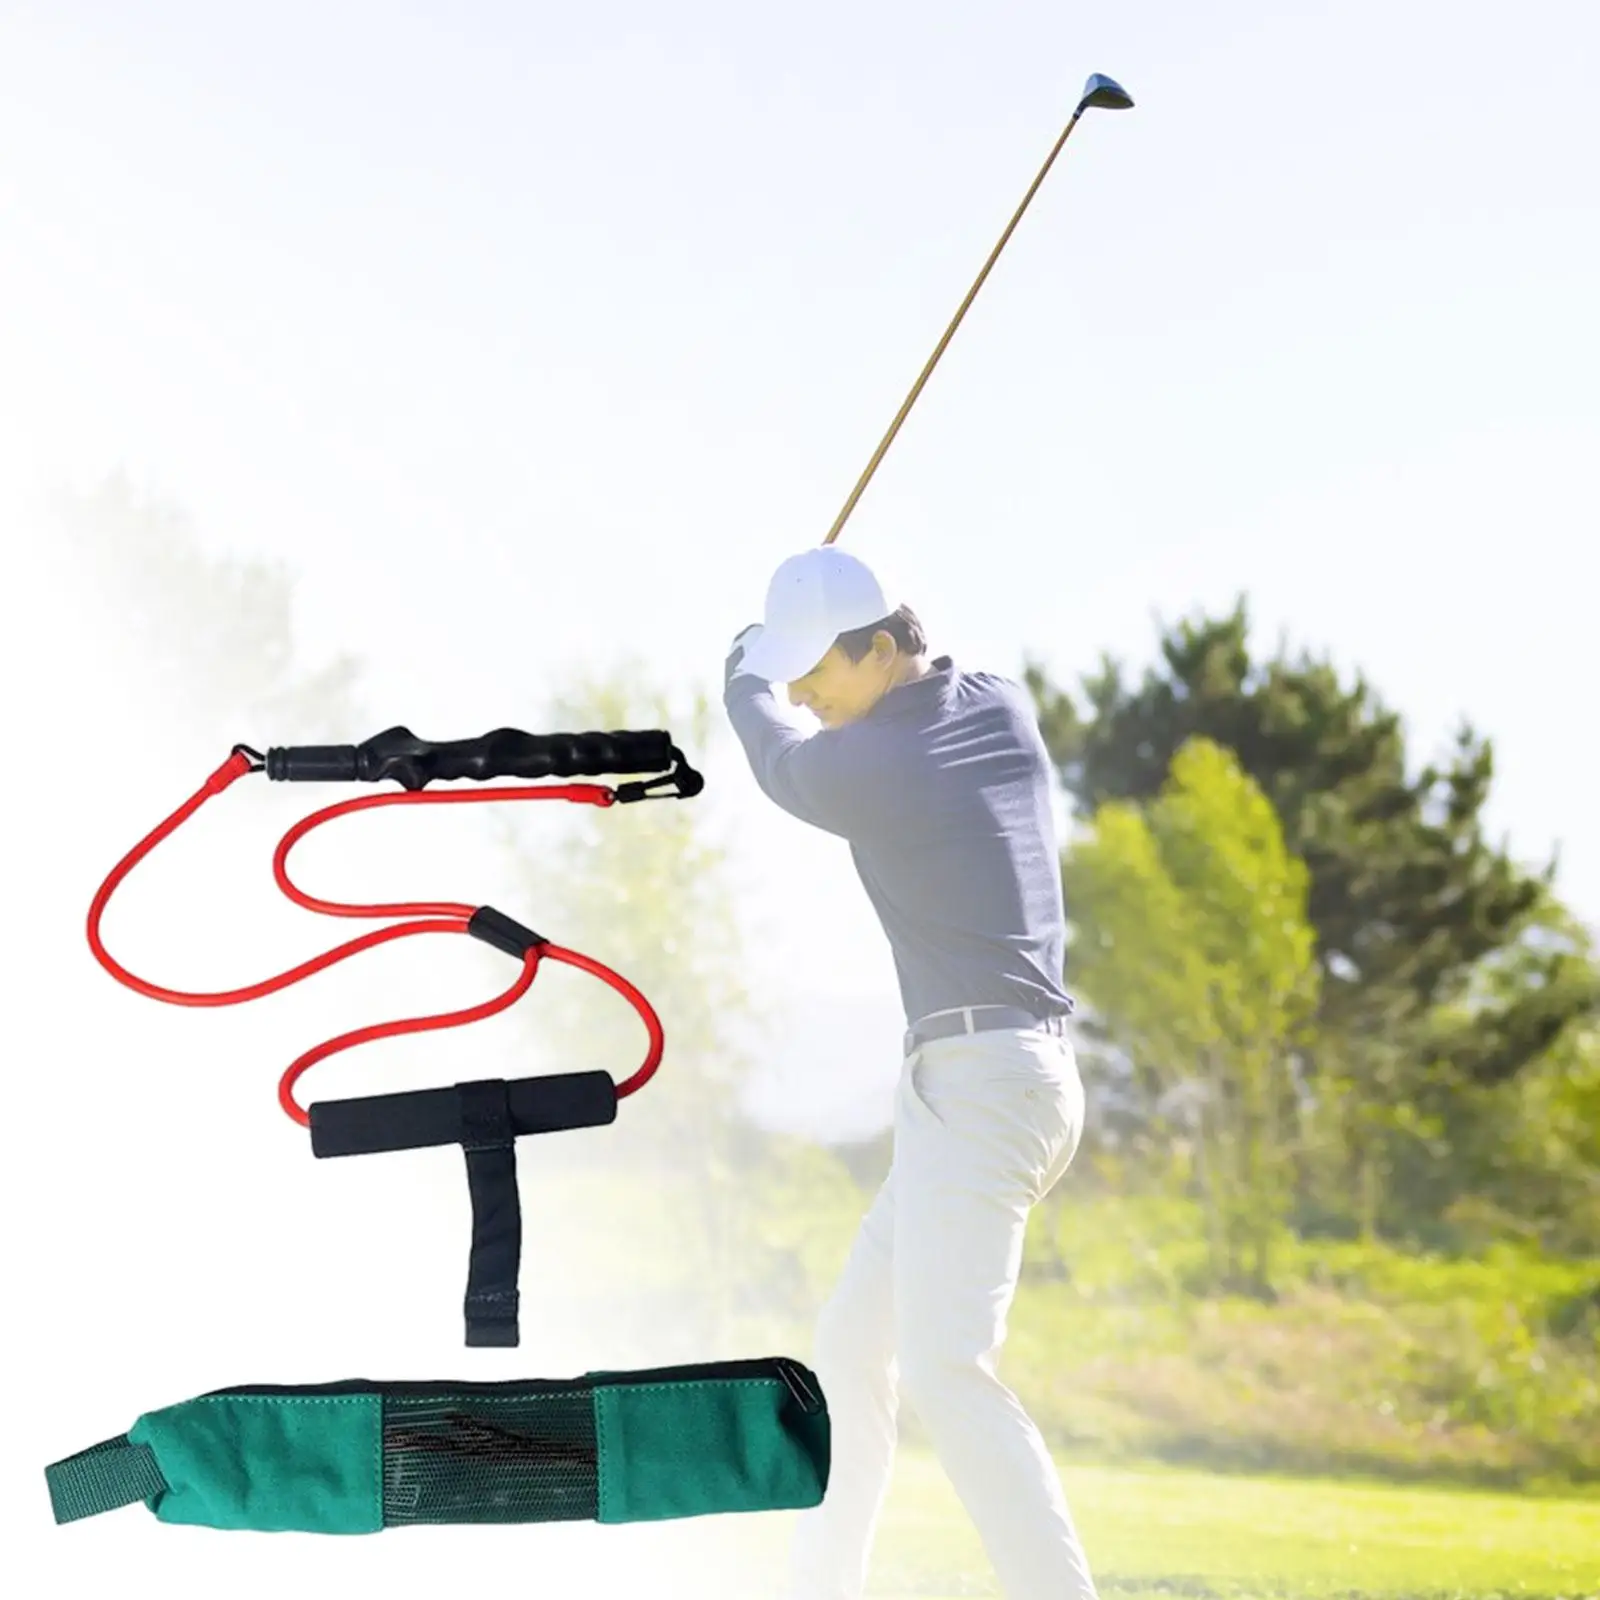 Golf Swing Resistance Bands Easy to Carry for Woman Men Golf Training Aid